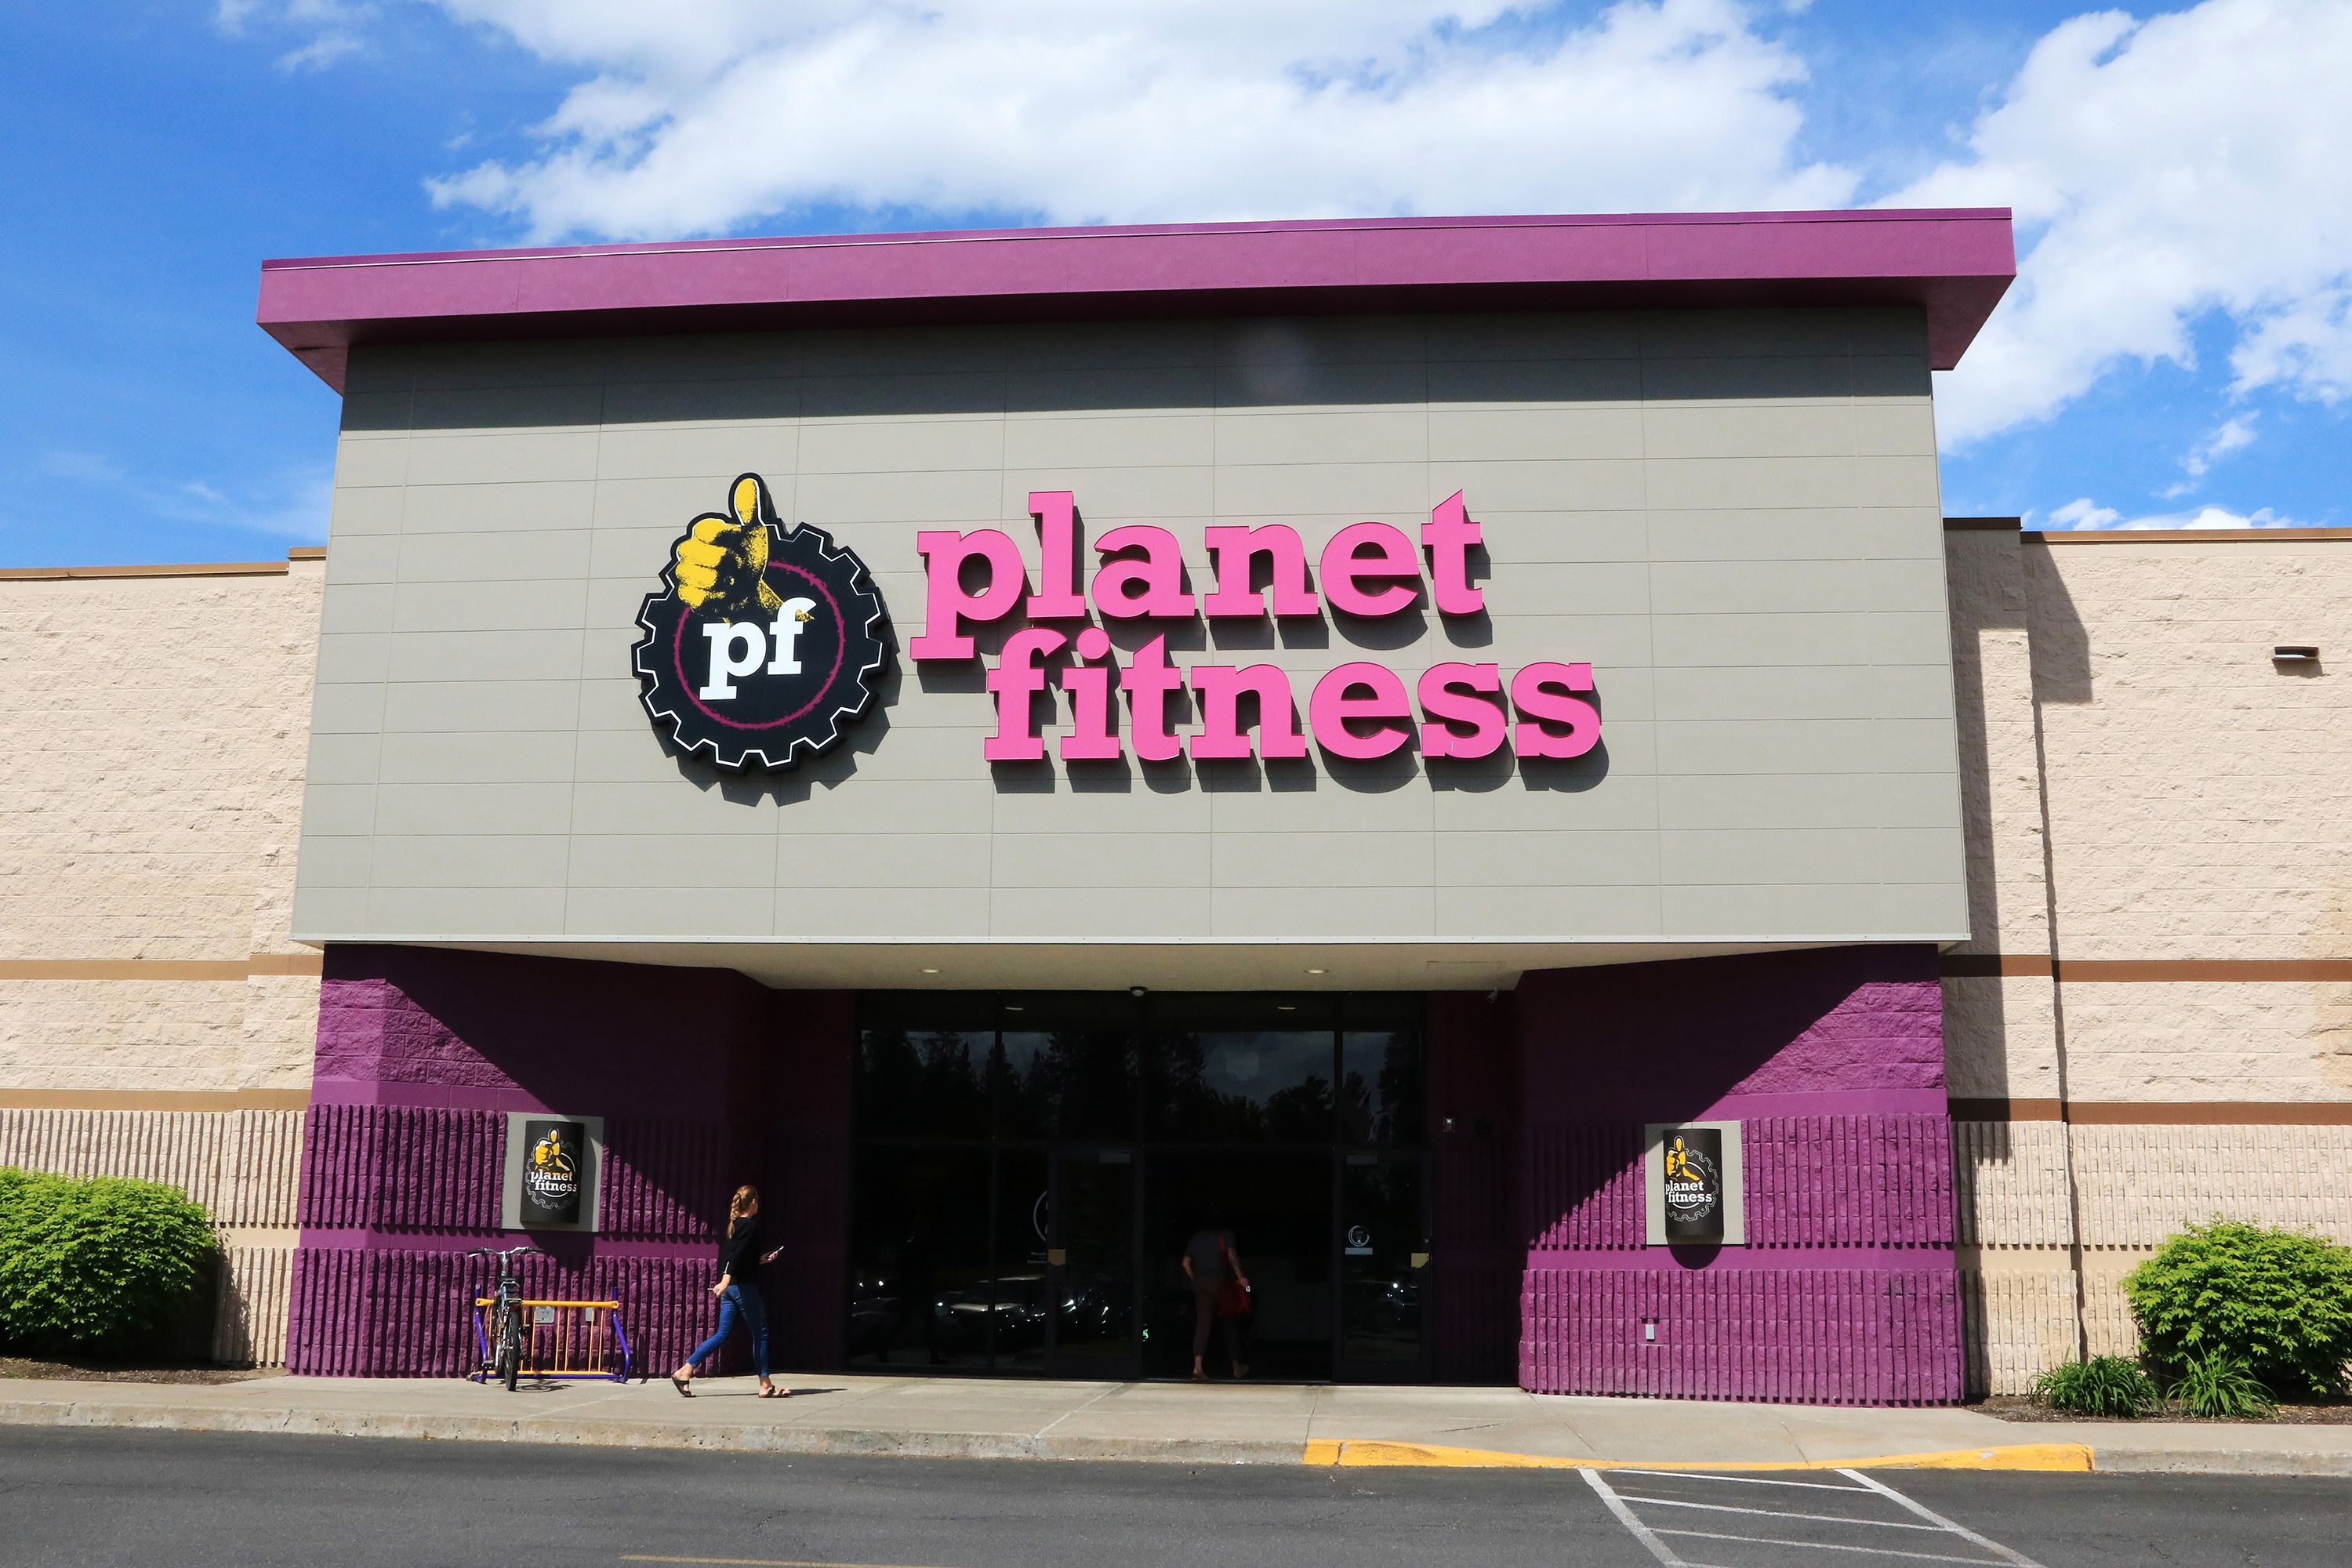 Introducing Planet Fitness. No Frills, No Judgement, Low Cost Gym at  Gerrard Square, Toronto. - Carmy - Easy Healthy-ish Recipes